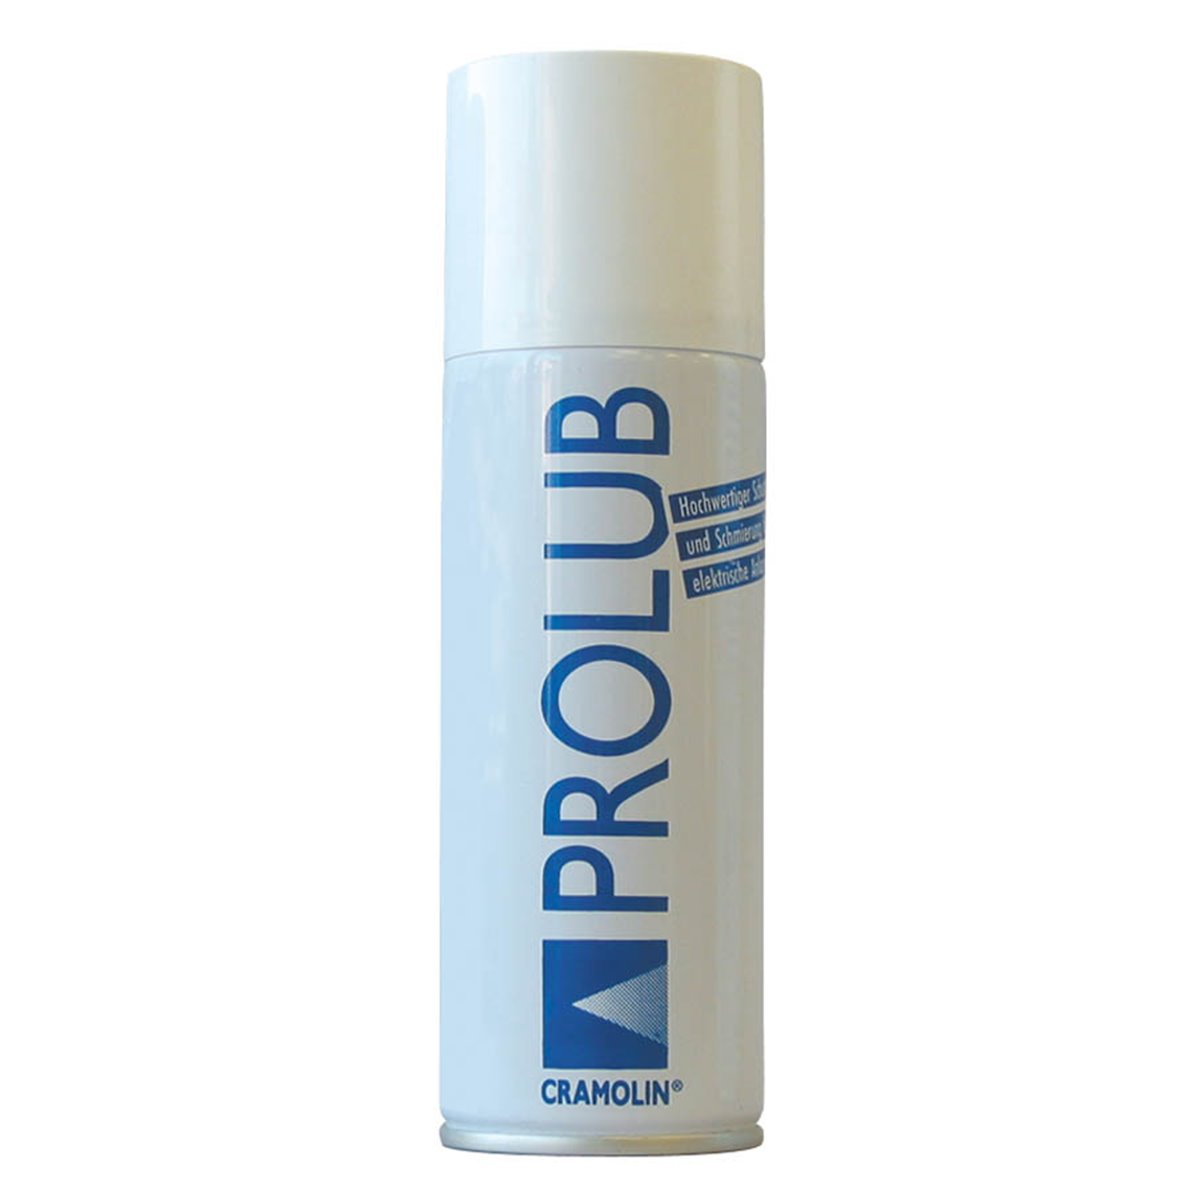 PROLUB 400 ml Cramolin - a corrosion protection and lubrication agent.